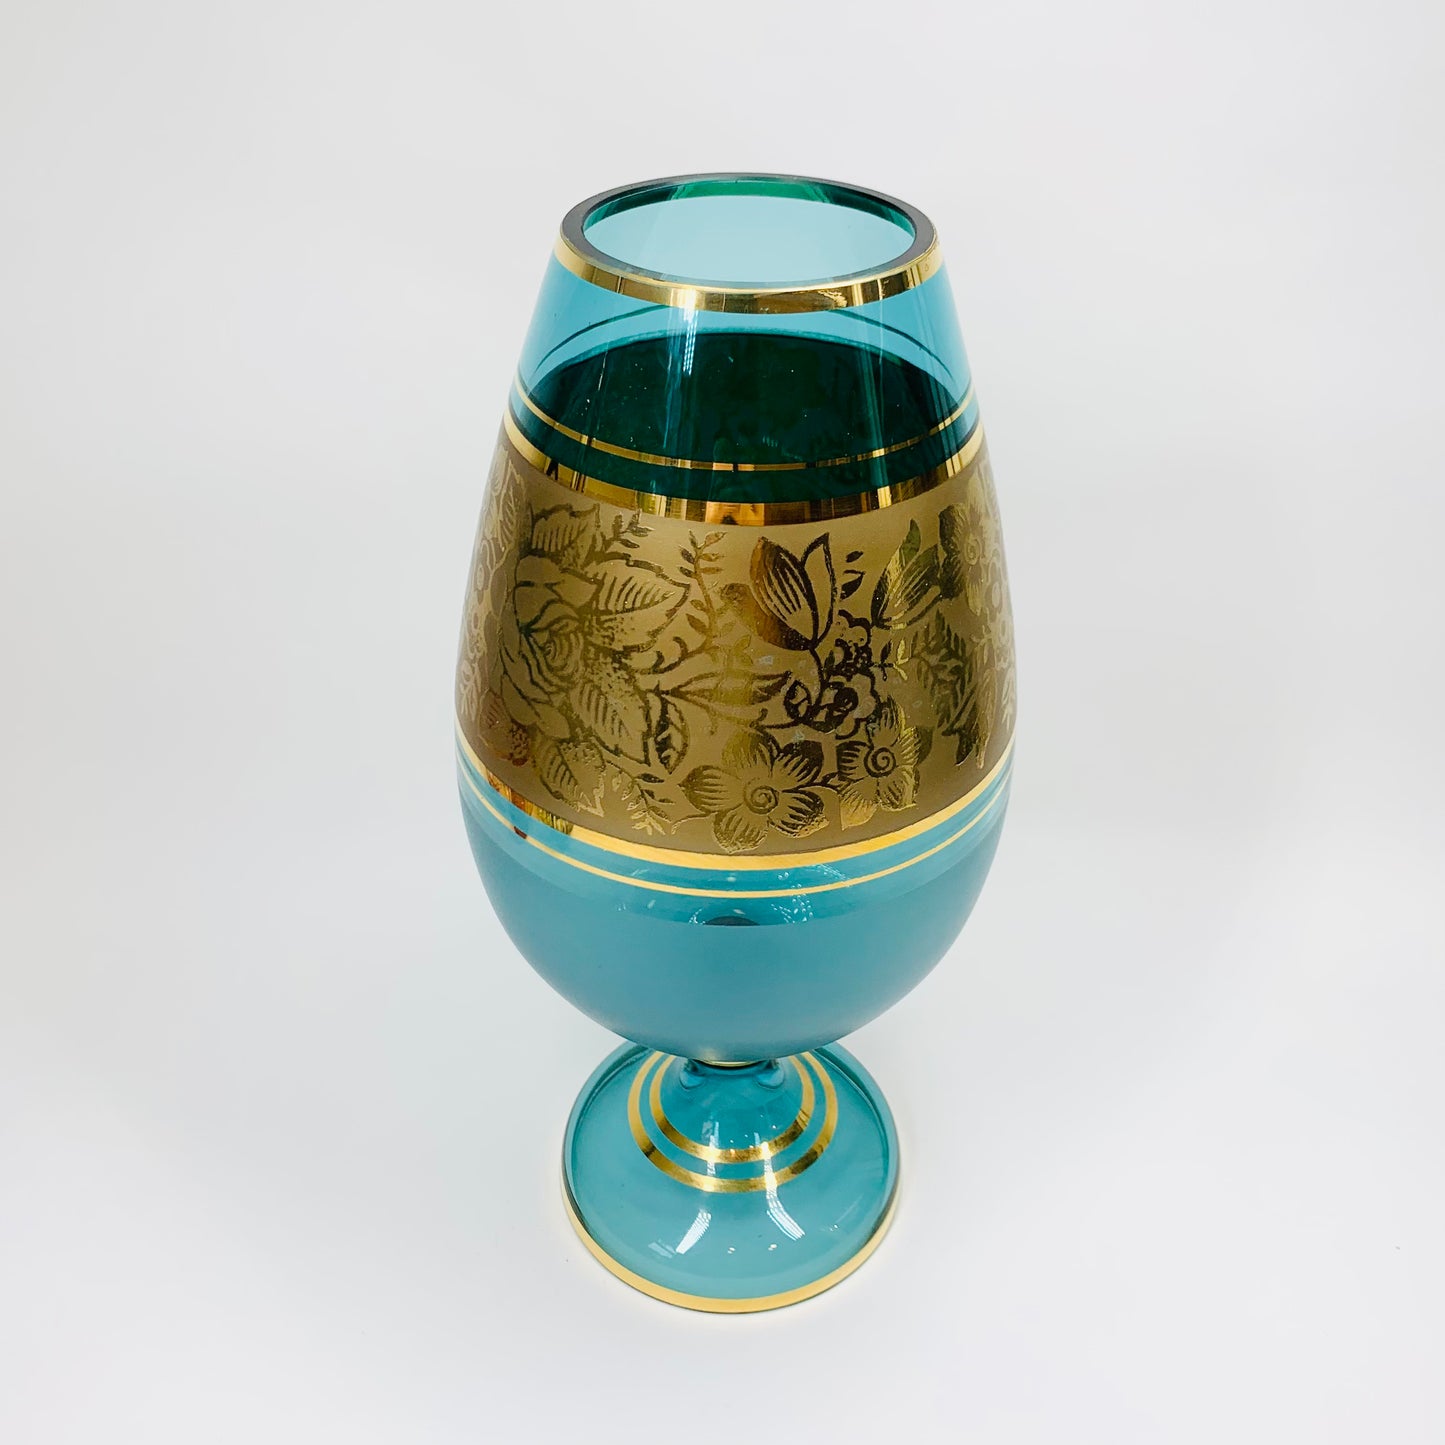 Rare Midcentury Bohemian turquoise glass footed vase with gold gilding